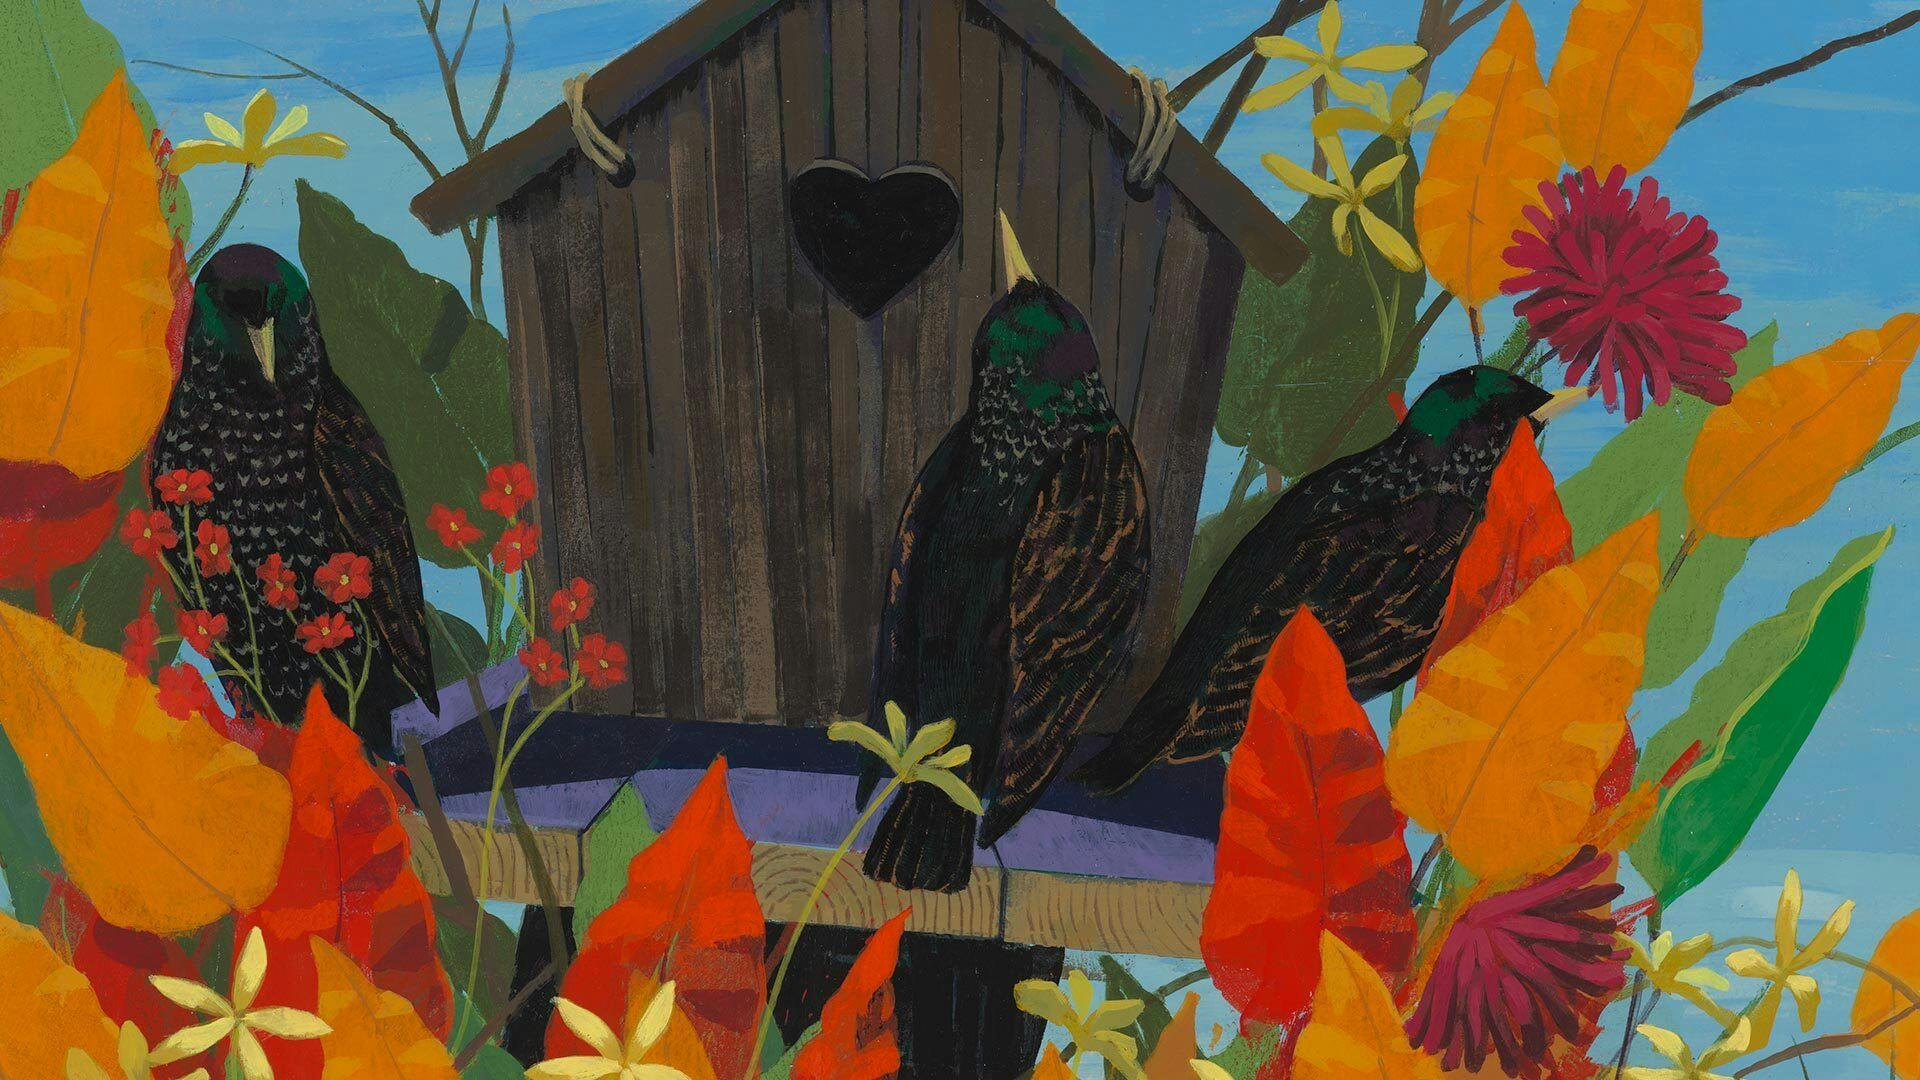 A detail from the work titled Black and Part Black Birds in America: (European Starlings) by Kerry James Marshall, dated 2021